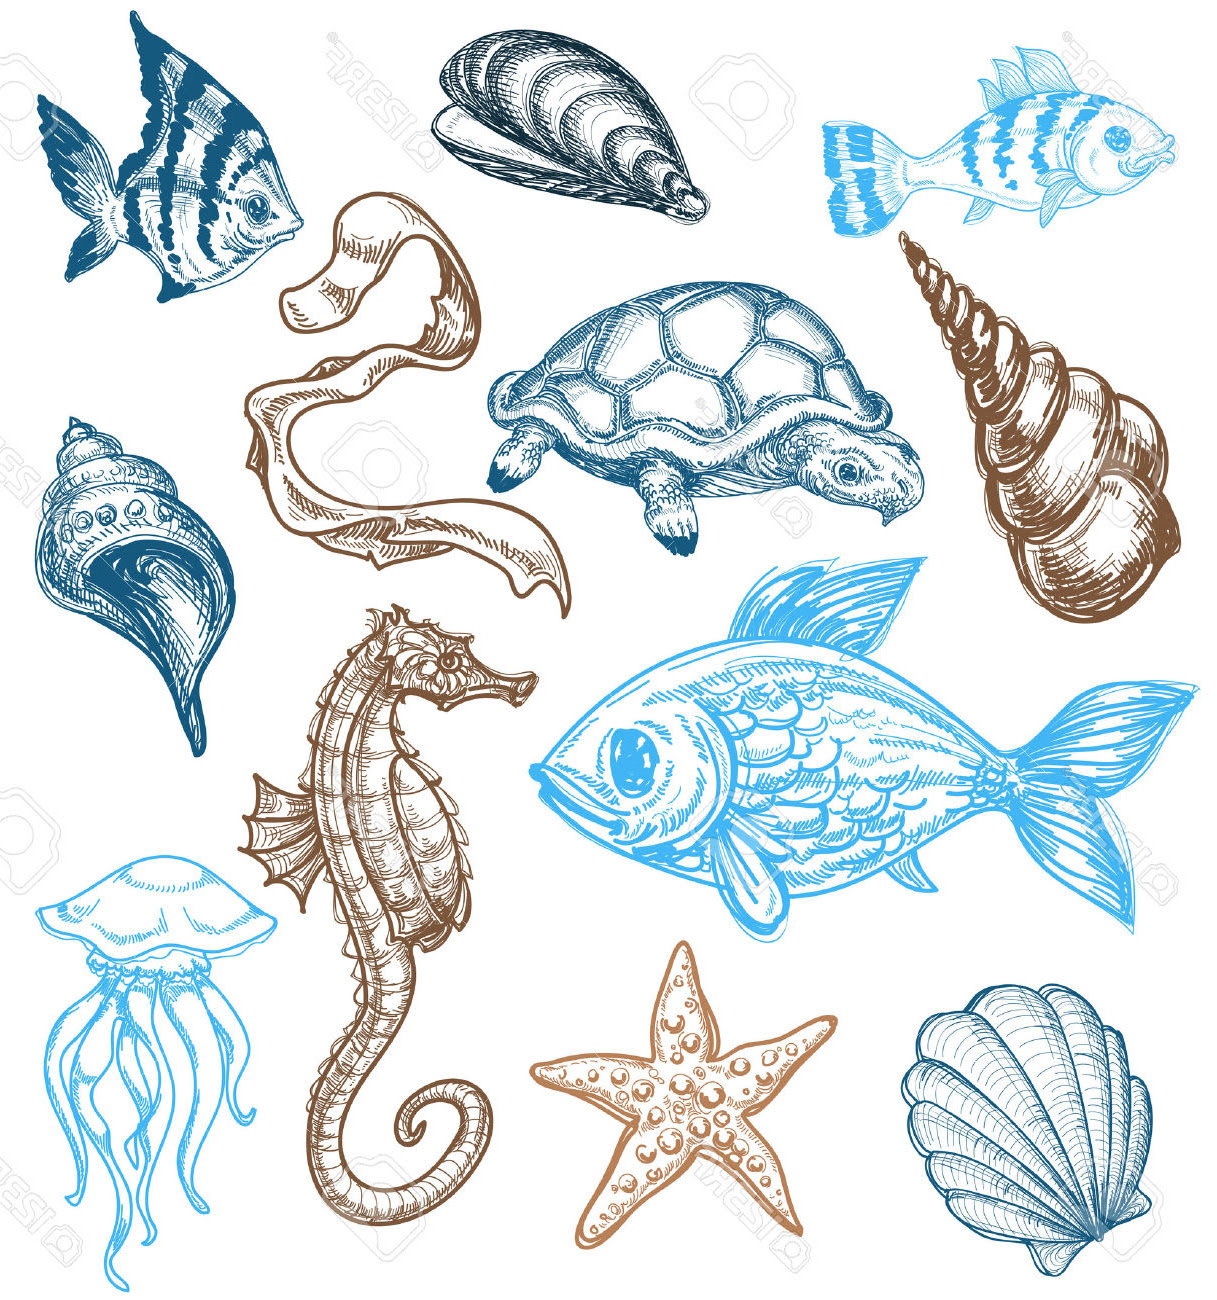 Easy Cute Sea Creatures To Draw